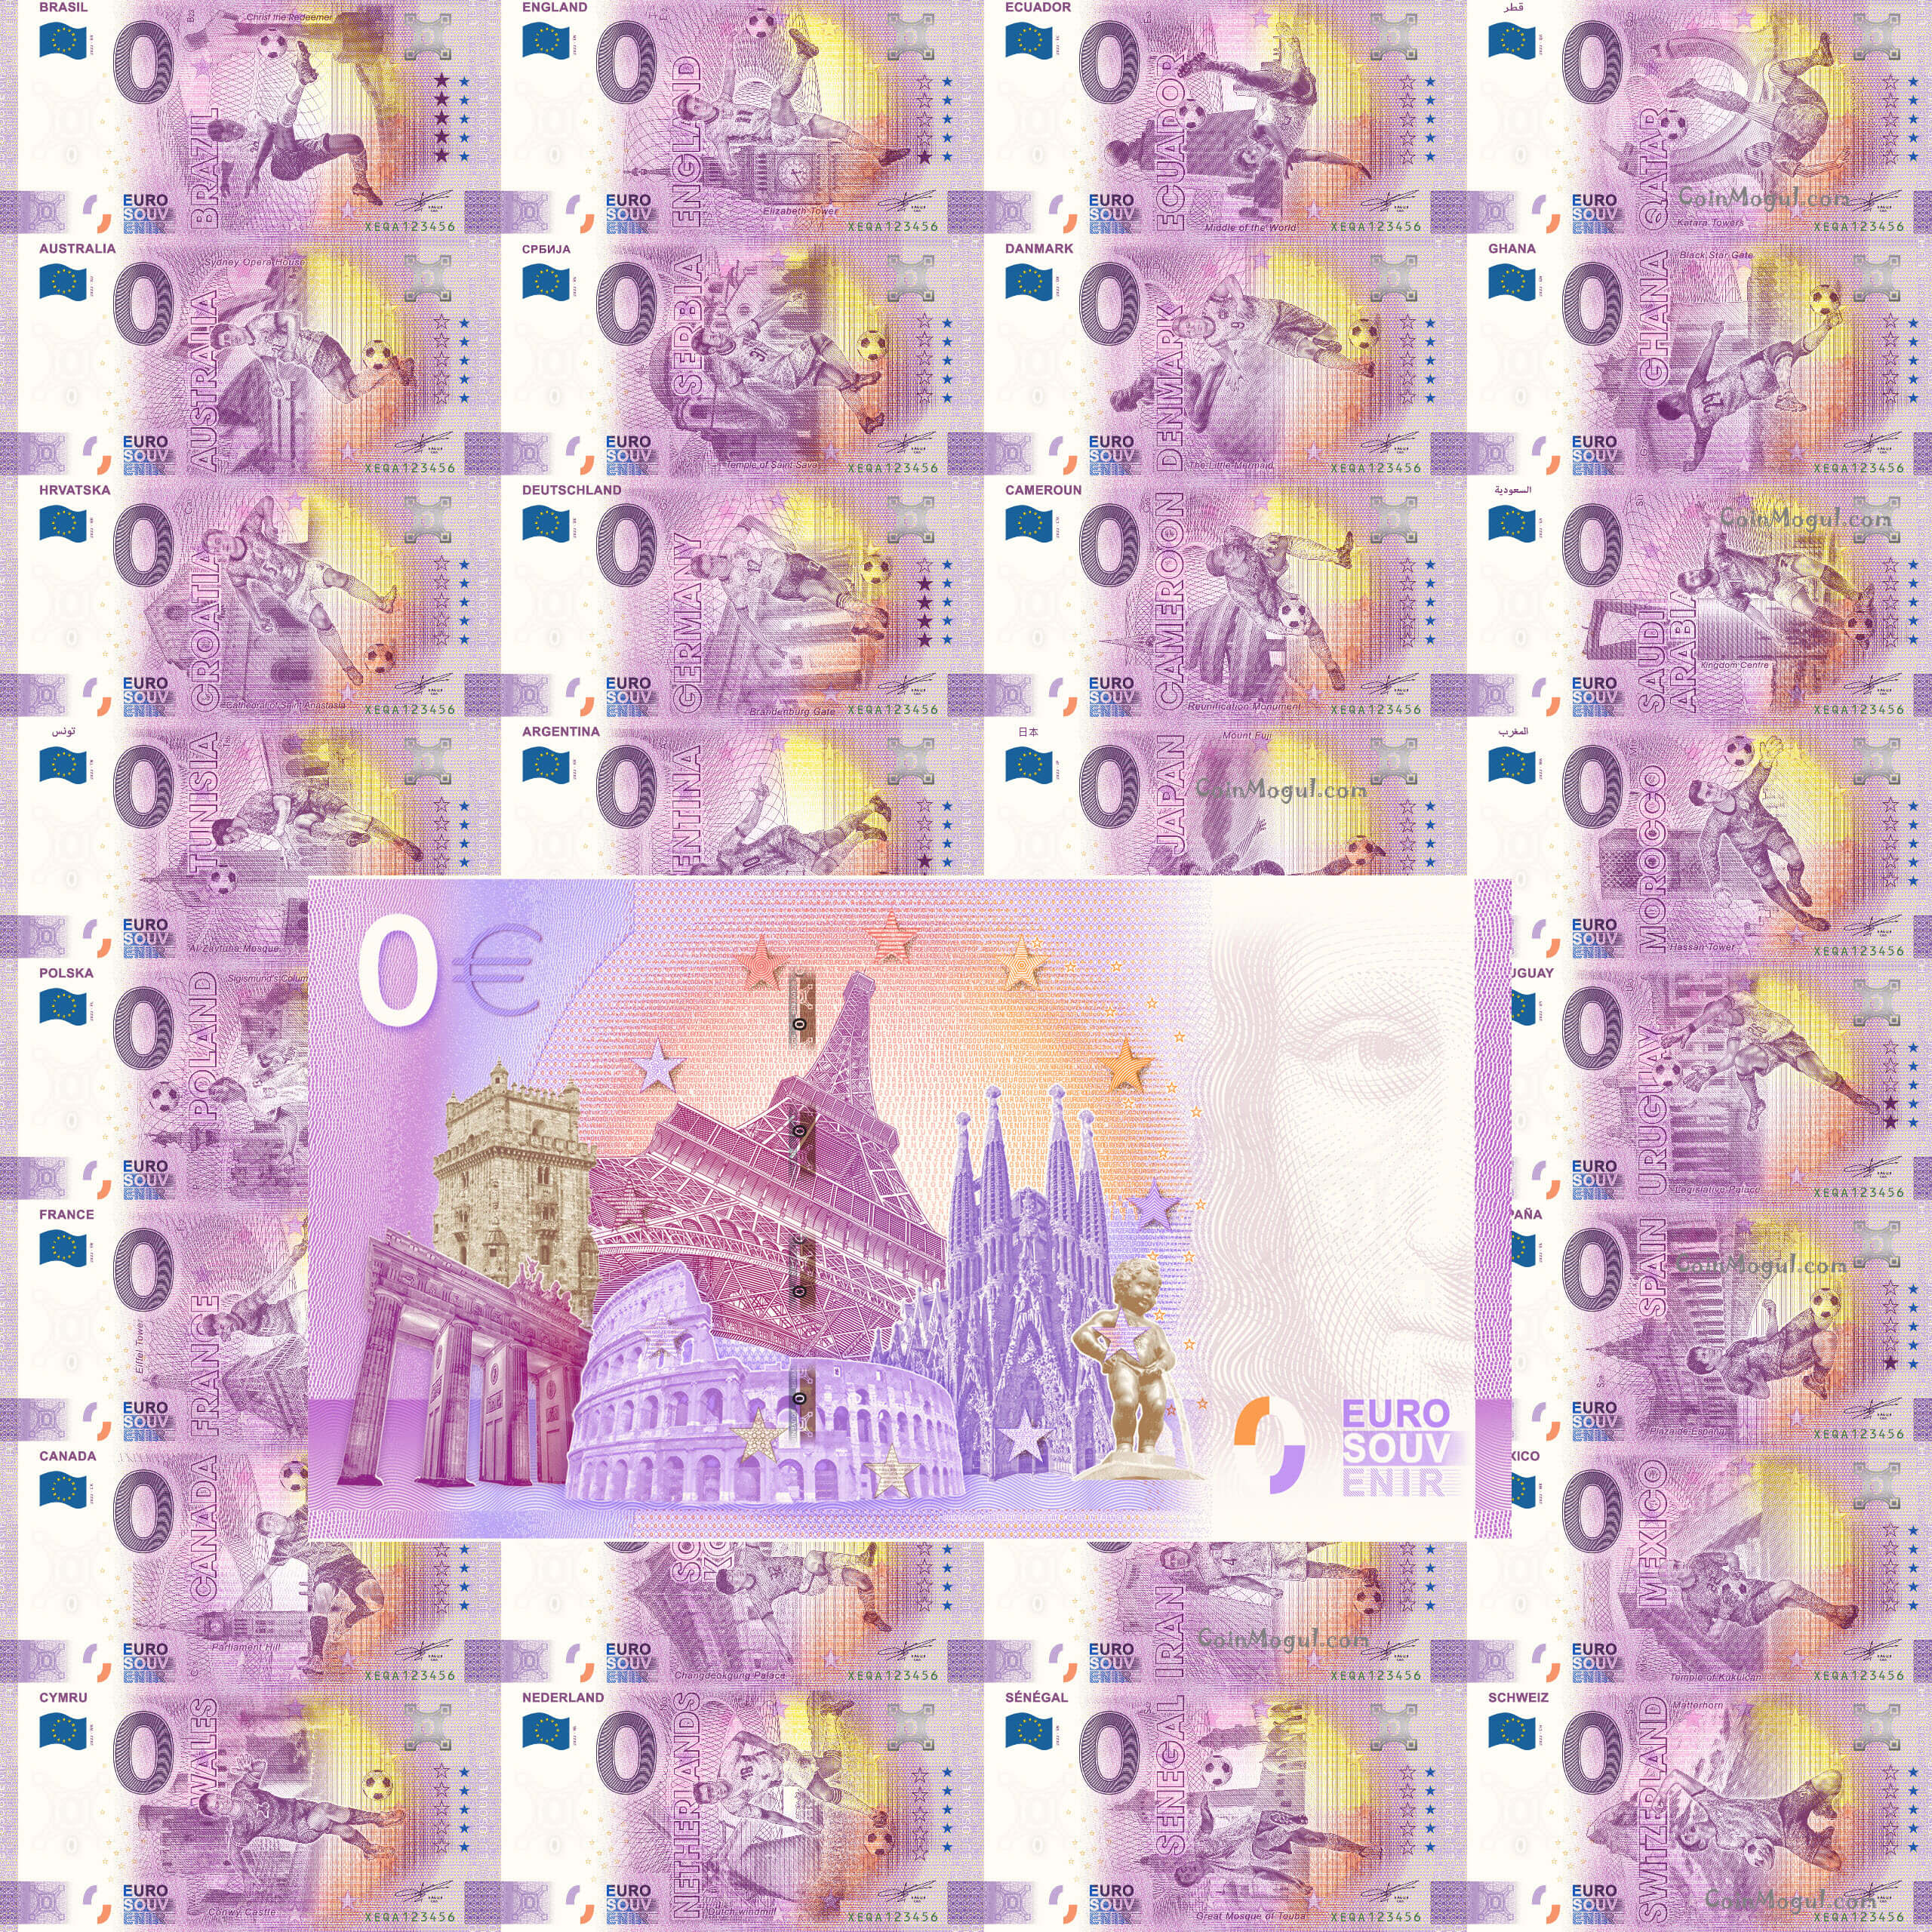 32-Country QATAR World Cup 0 Euro Note Set